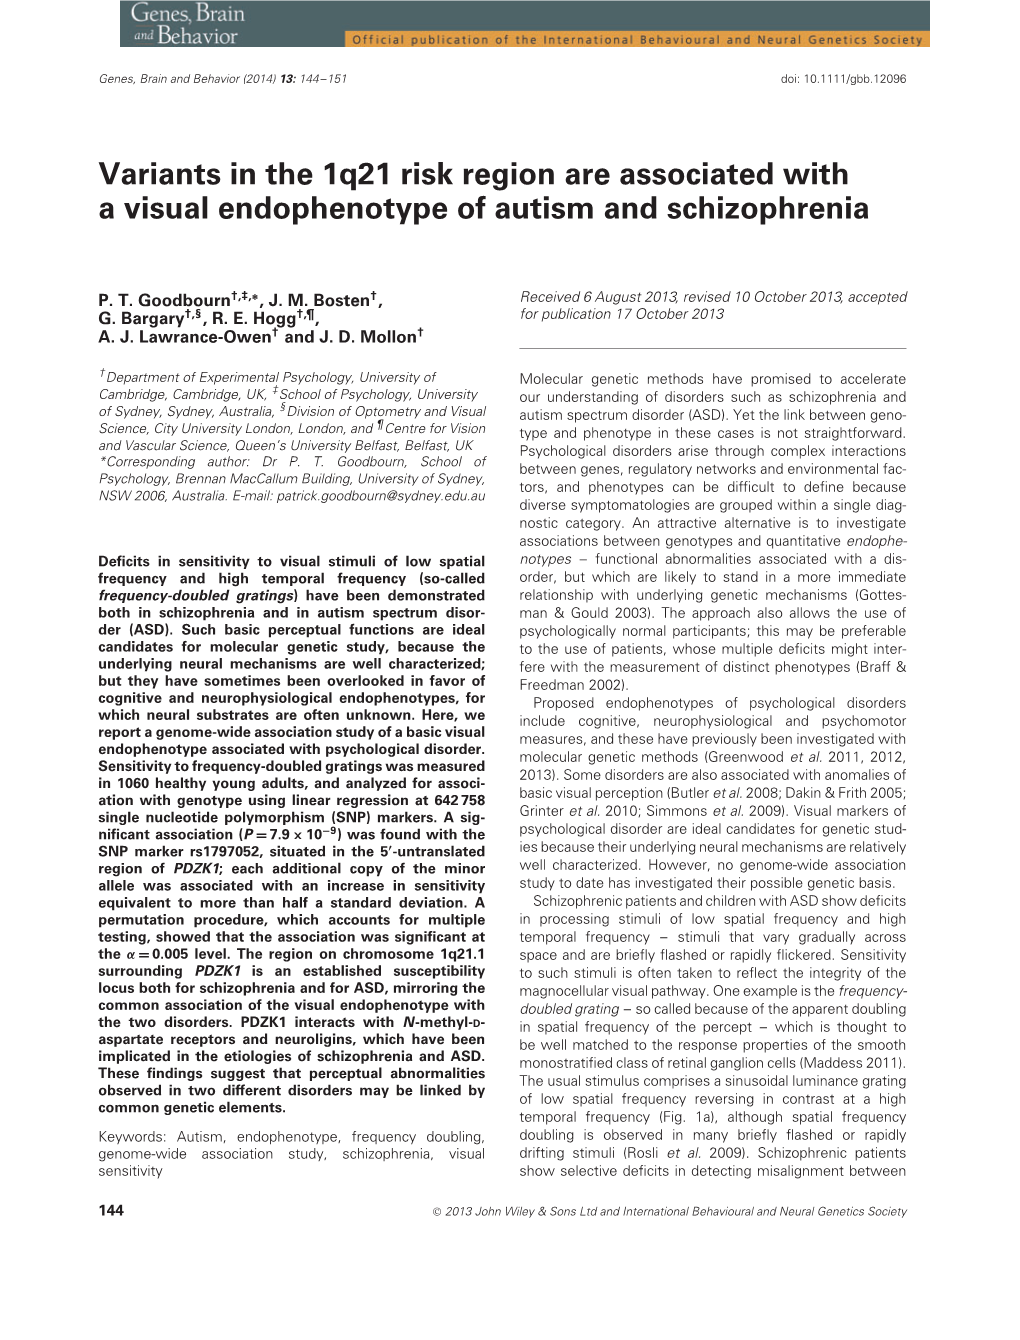 Variants in the 1Q21 Risk Region Are Associated with a Visual Endophenotype of Autism and Schizophrenia